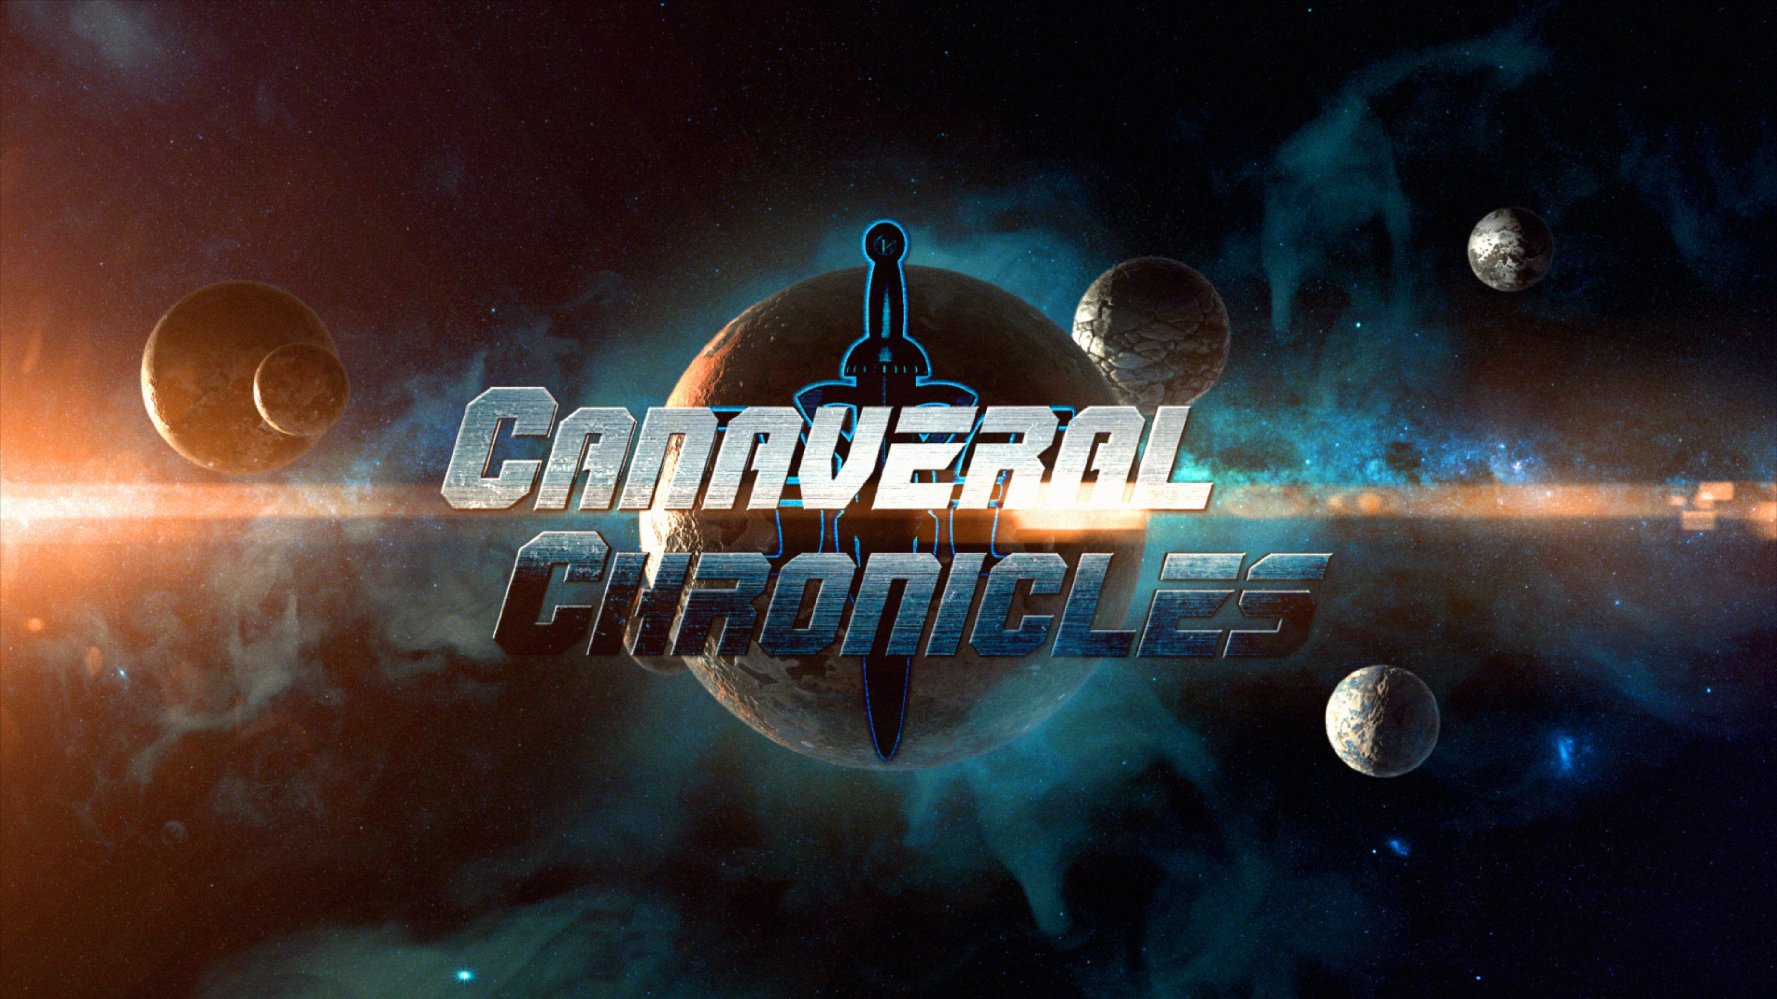 Canaveral Chronicles (2017)